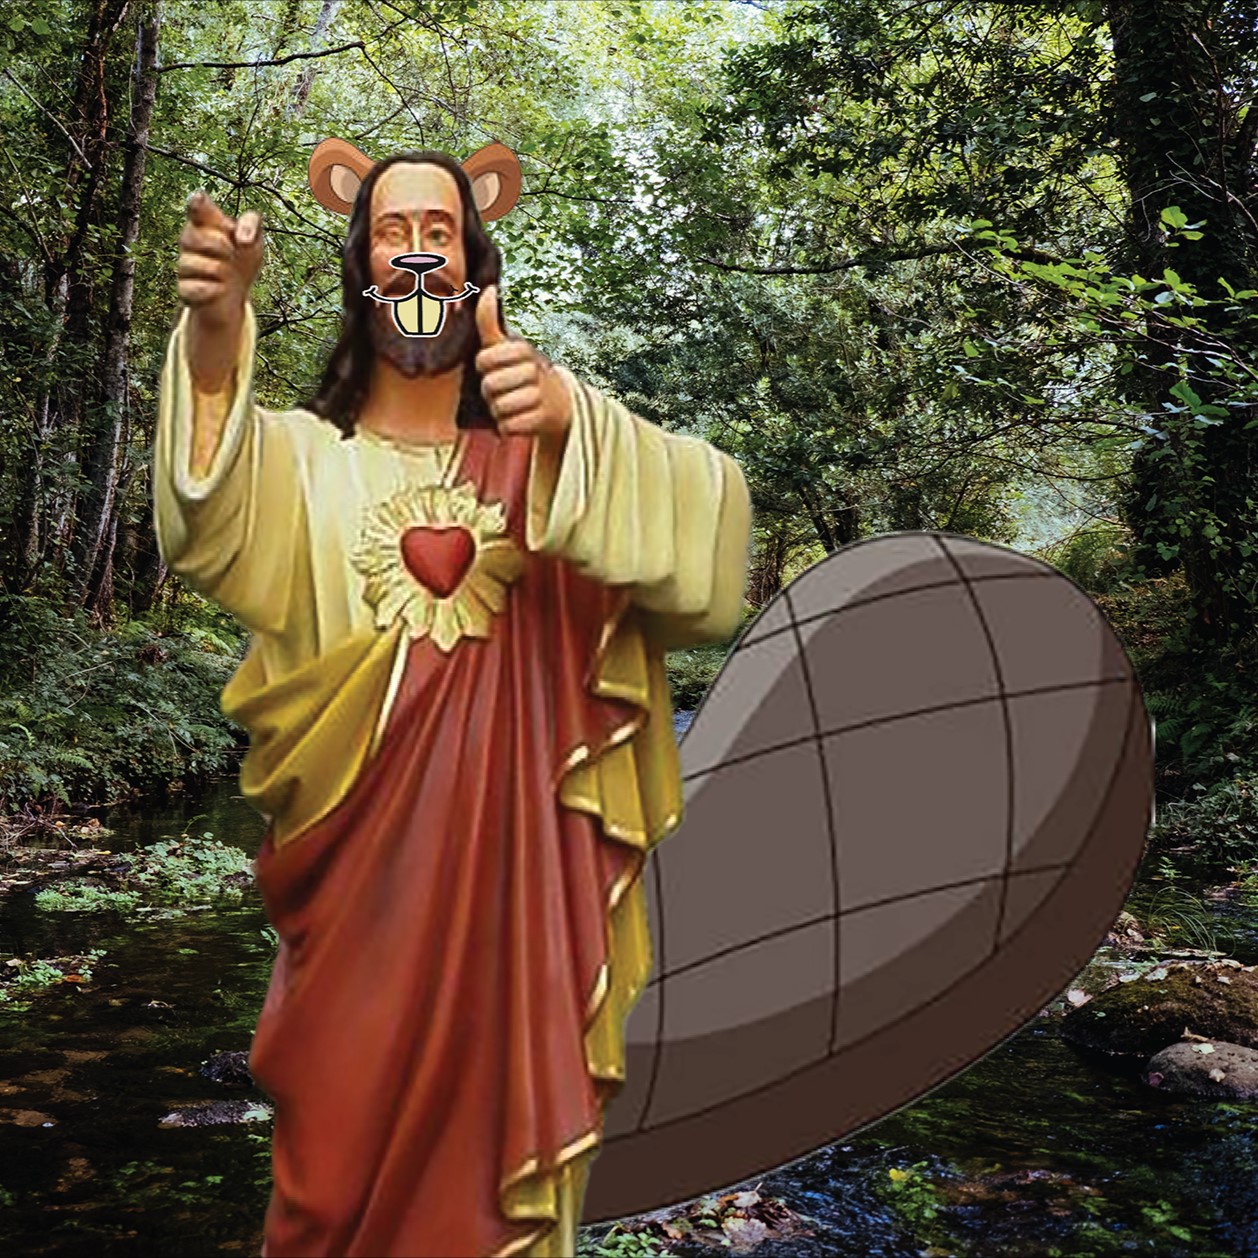 A jesus winking with nature in the background. There's a cartoon tail and buck teeth on the jesus